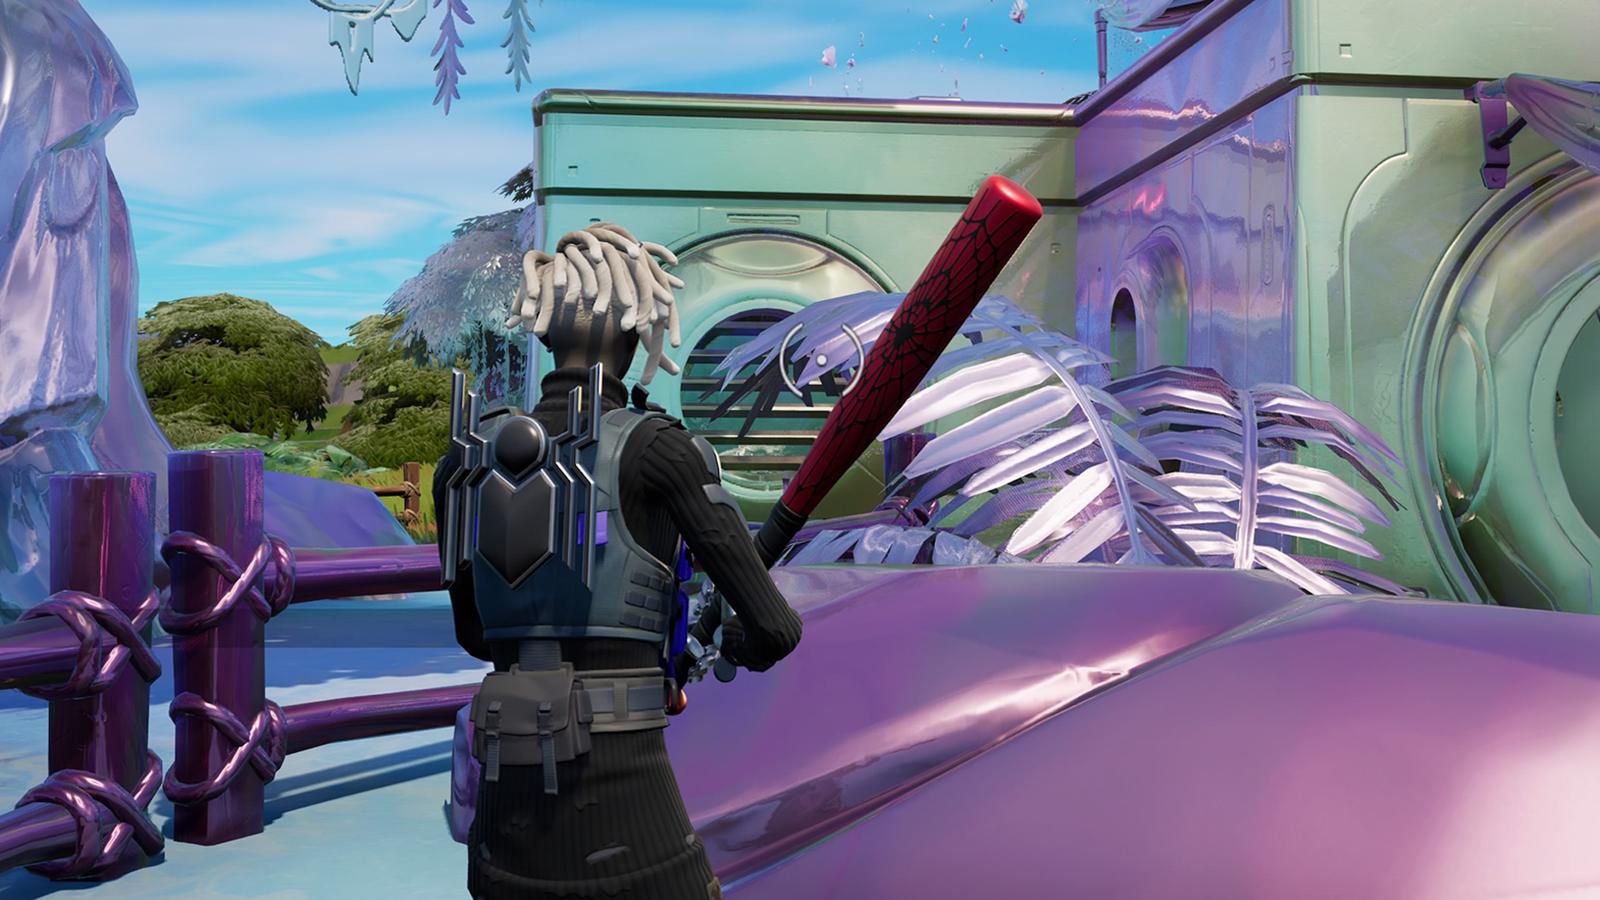 A Fortnite player destroying chrome structures